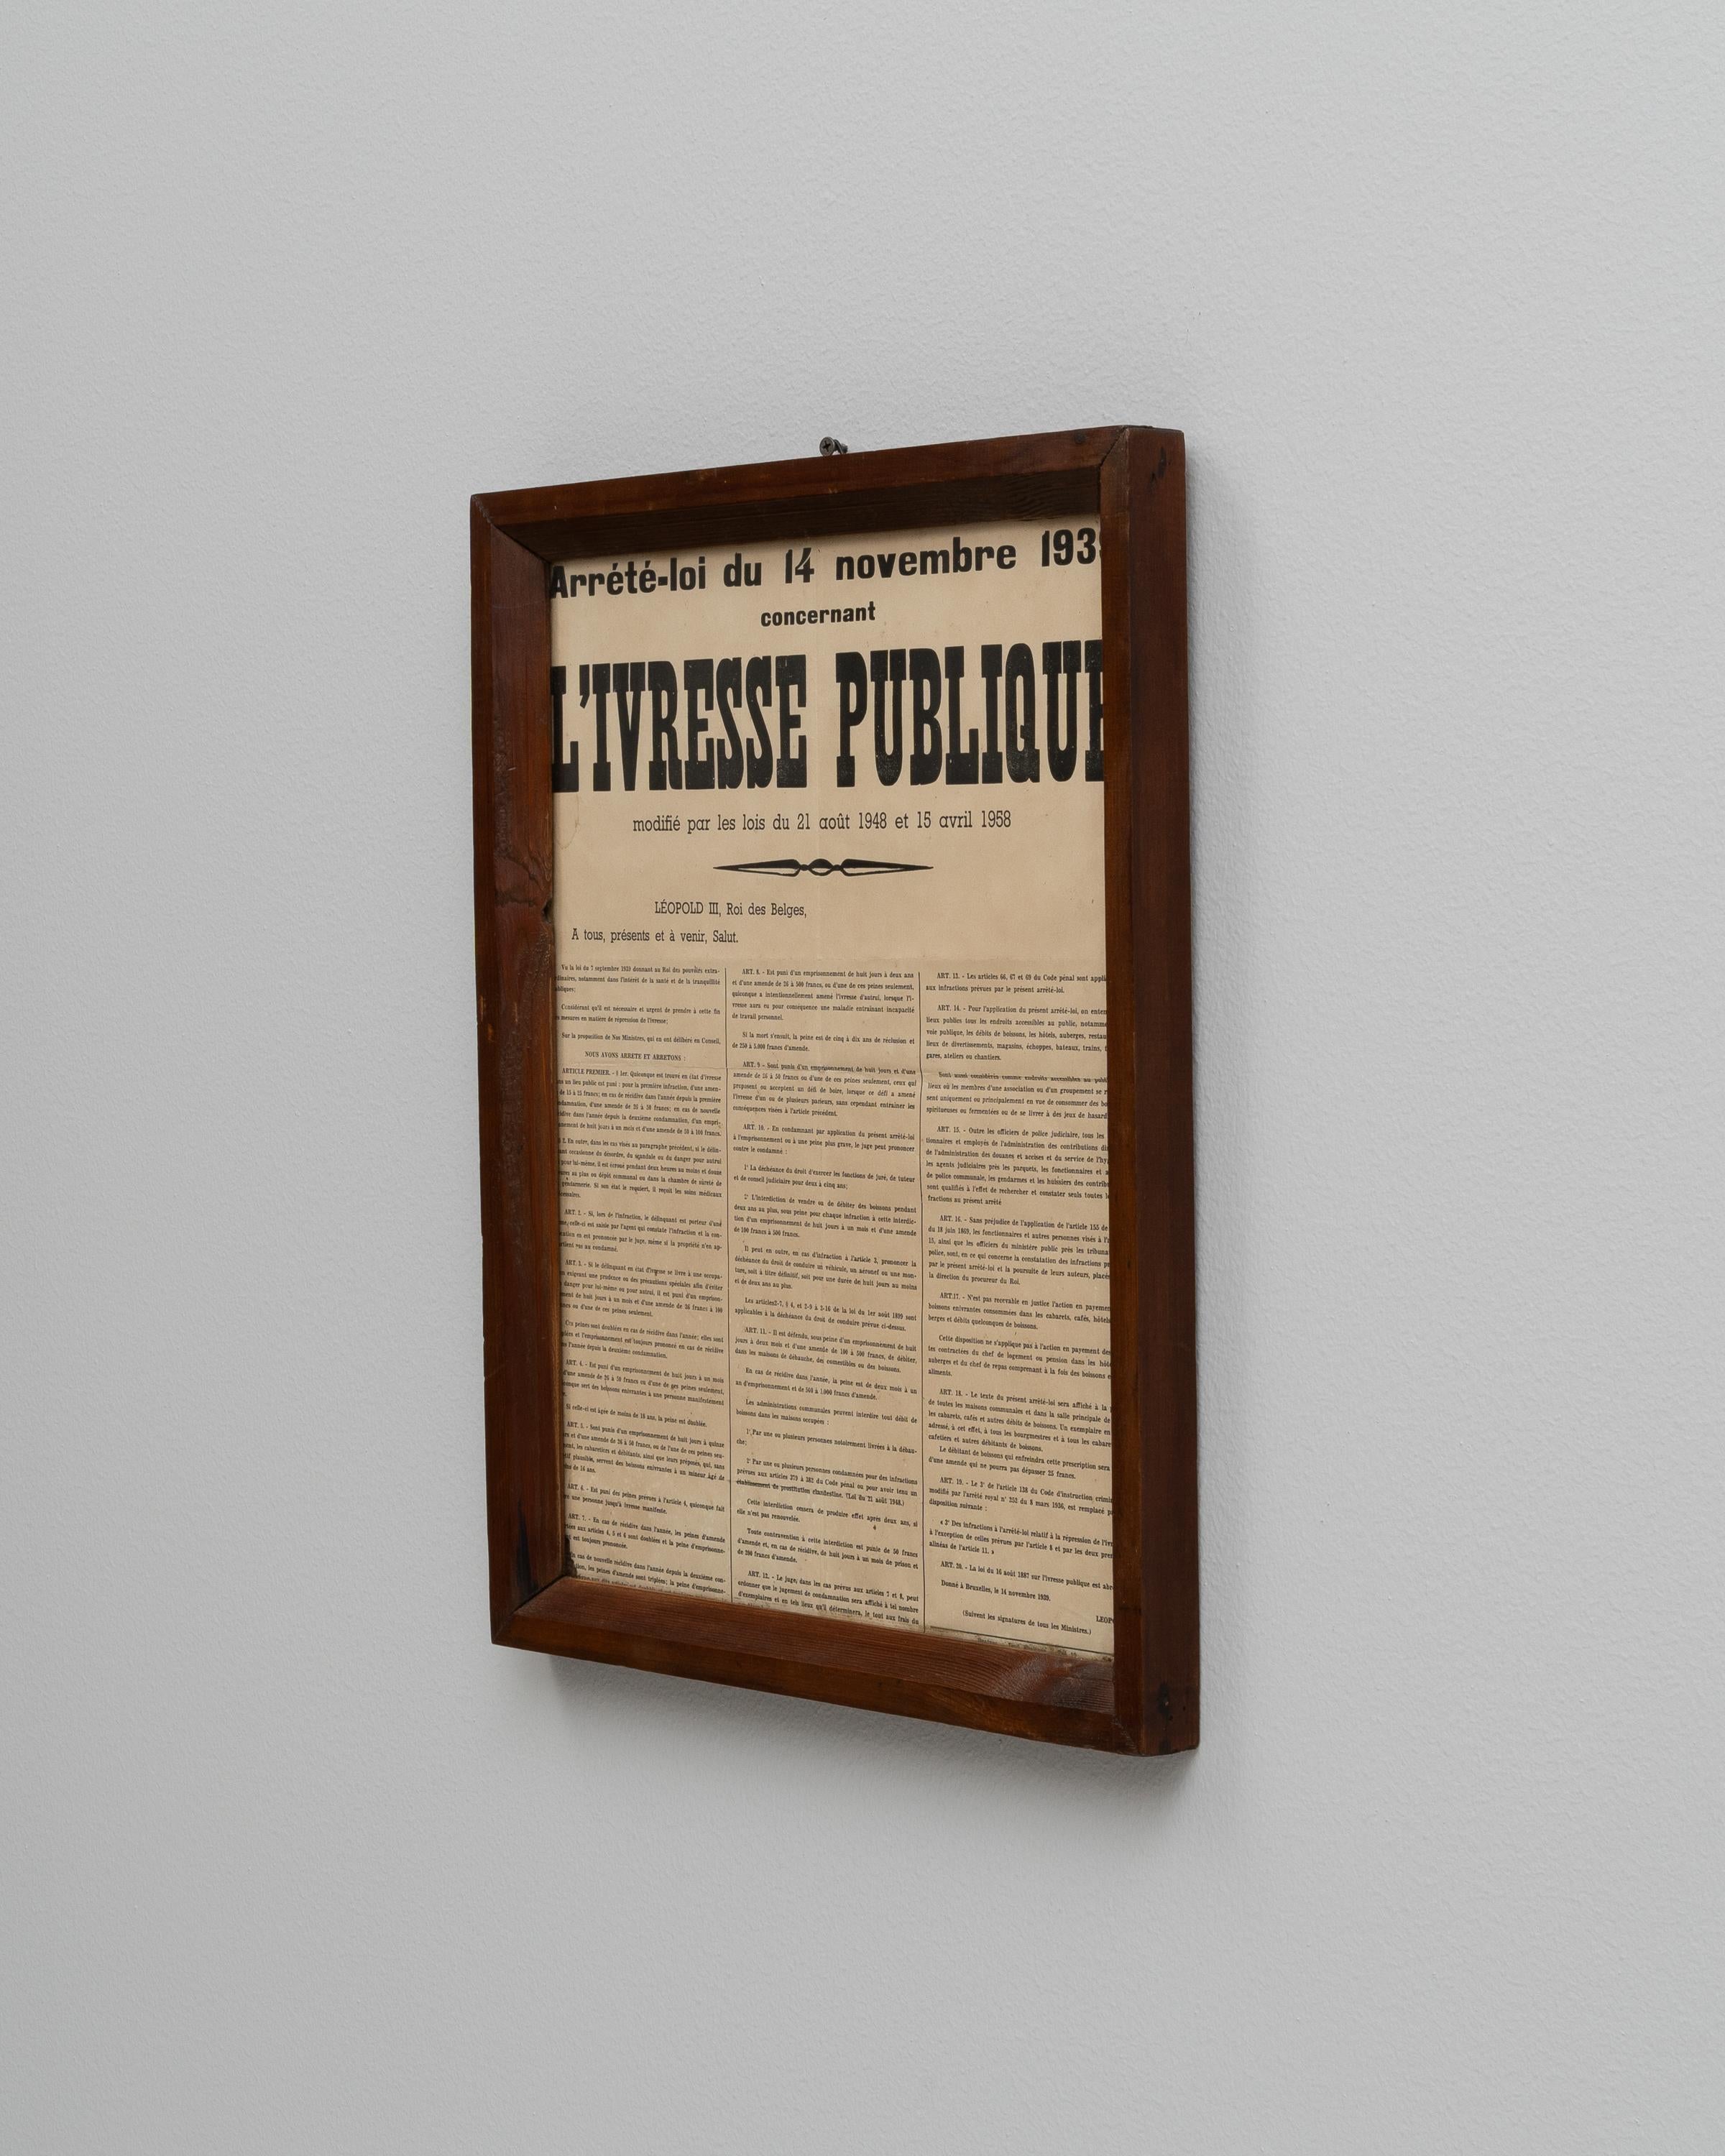 This intriguing early 20th-century Belgian framed artwork features a historical document titled 